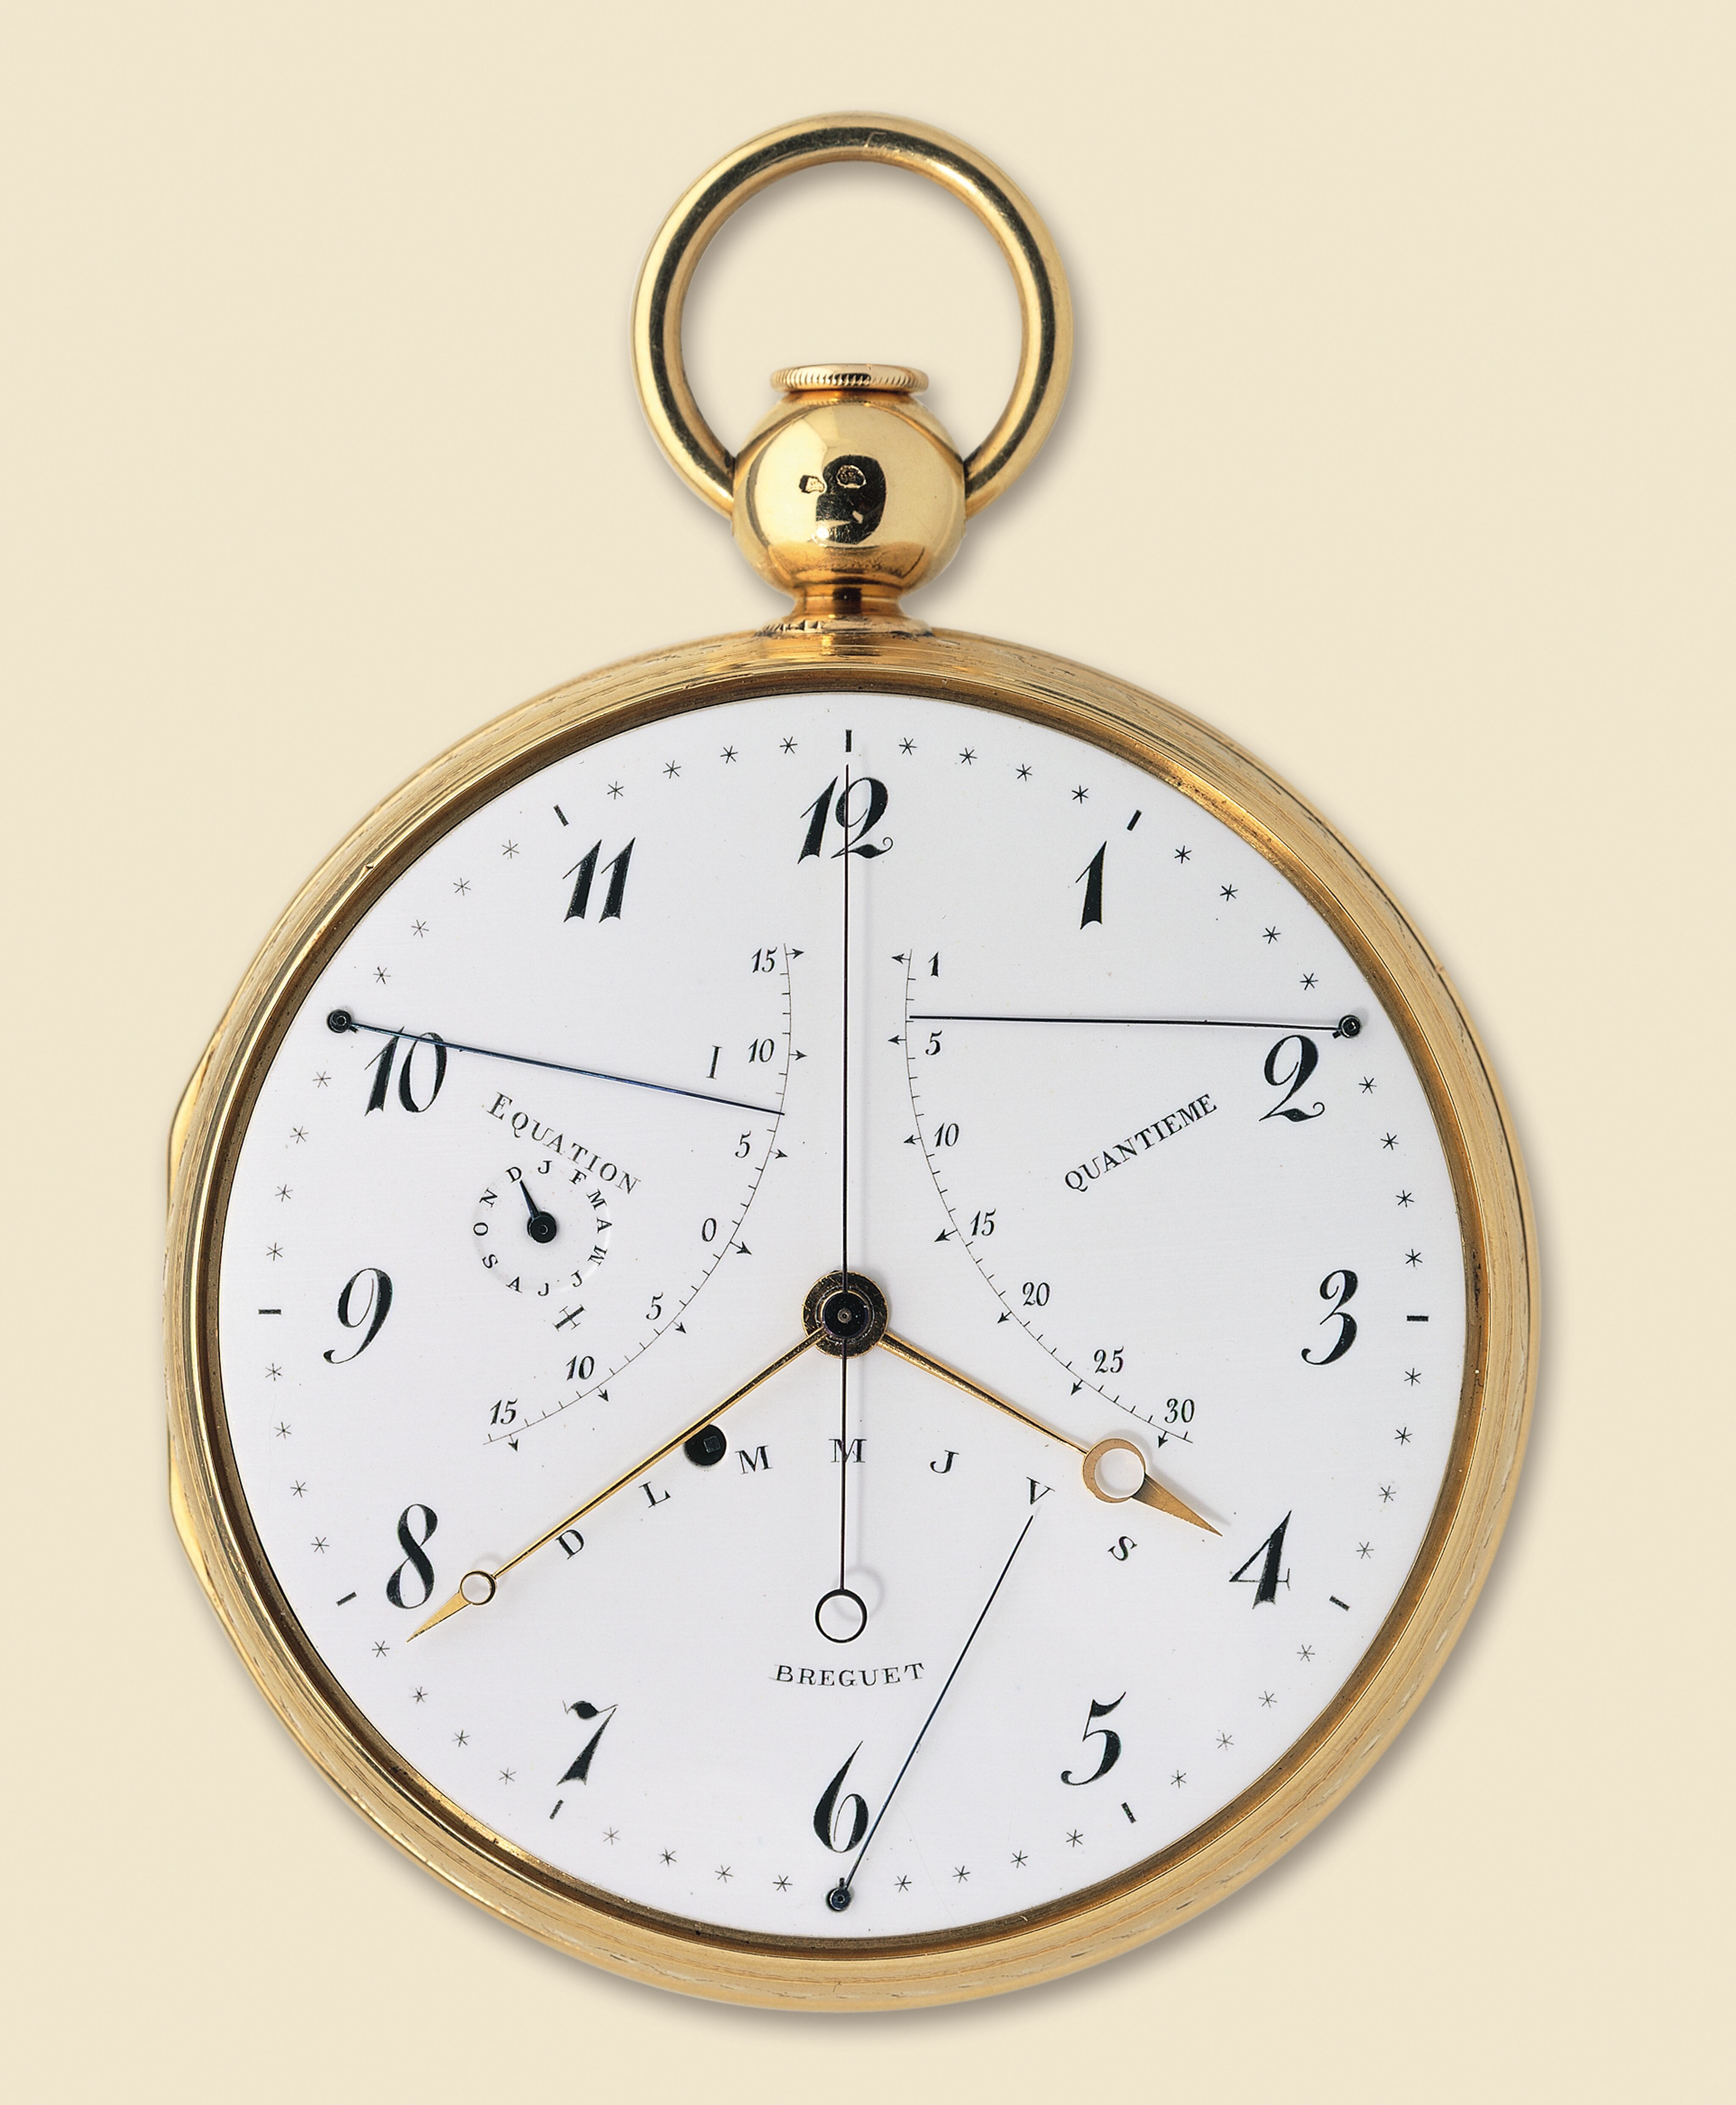 Breguet No. 92 pocket watch perpetual calendar in Our Favourite Uses of Typography in Watches for A Collected Man London